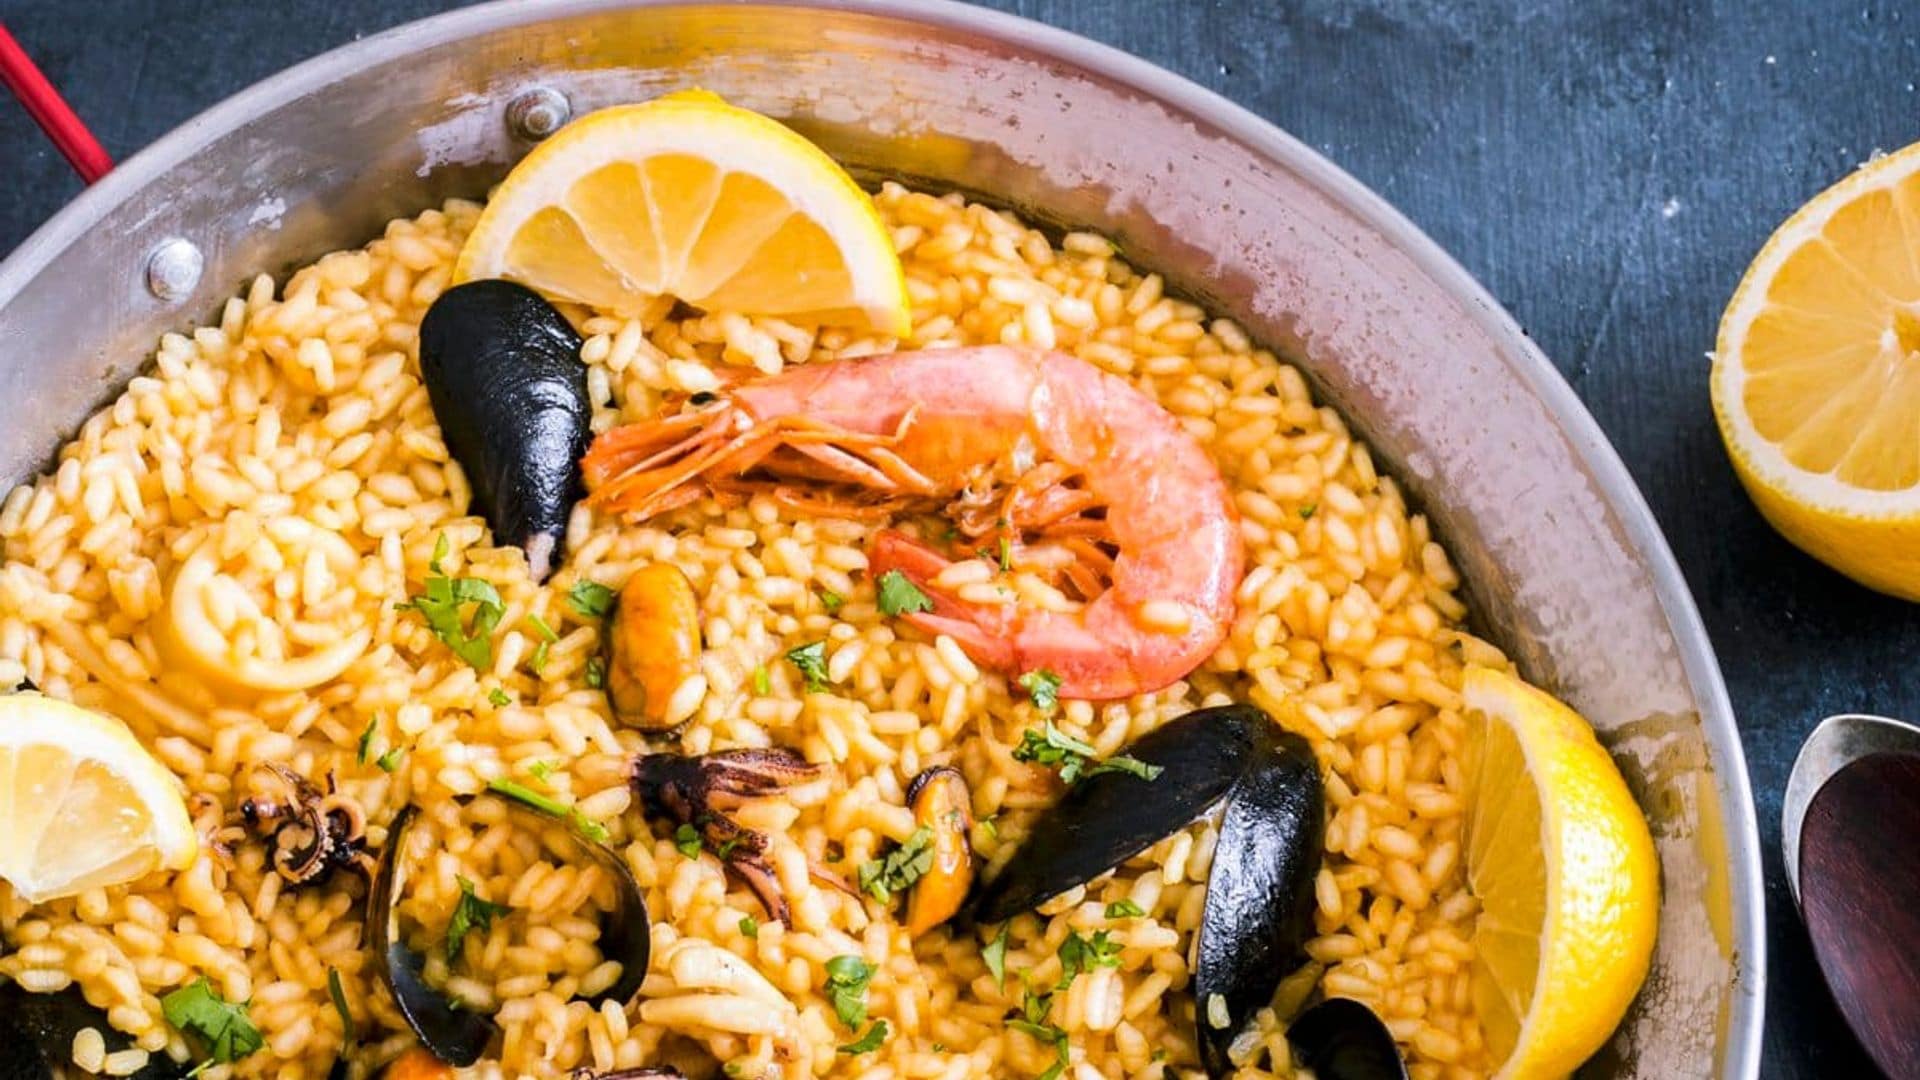 Impress your housemates with this Spanish seafood paella recipe